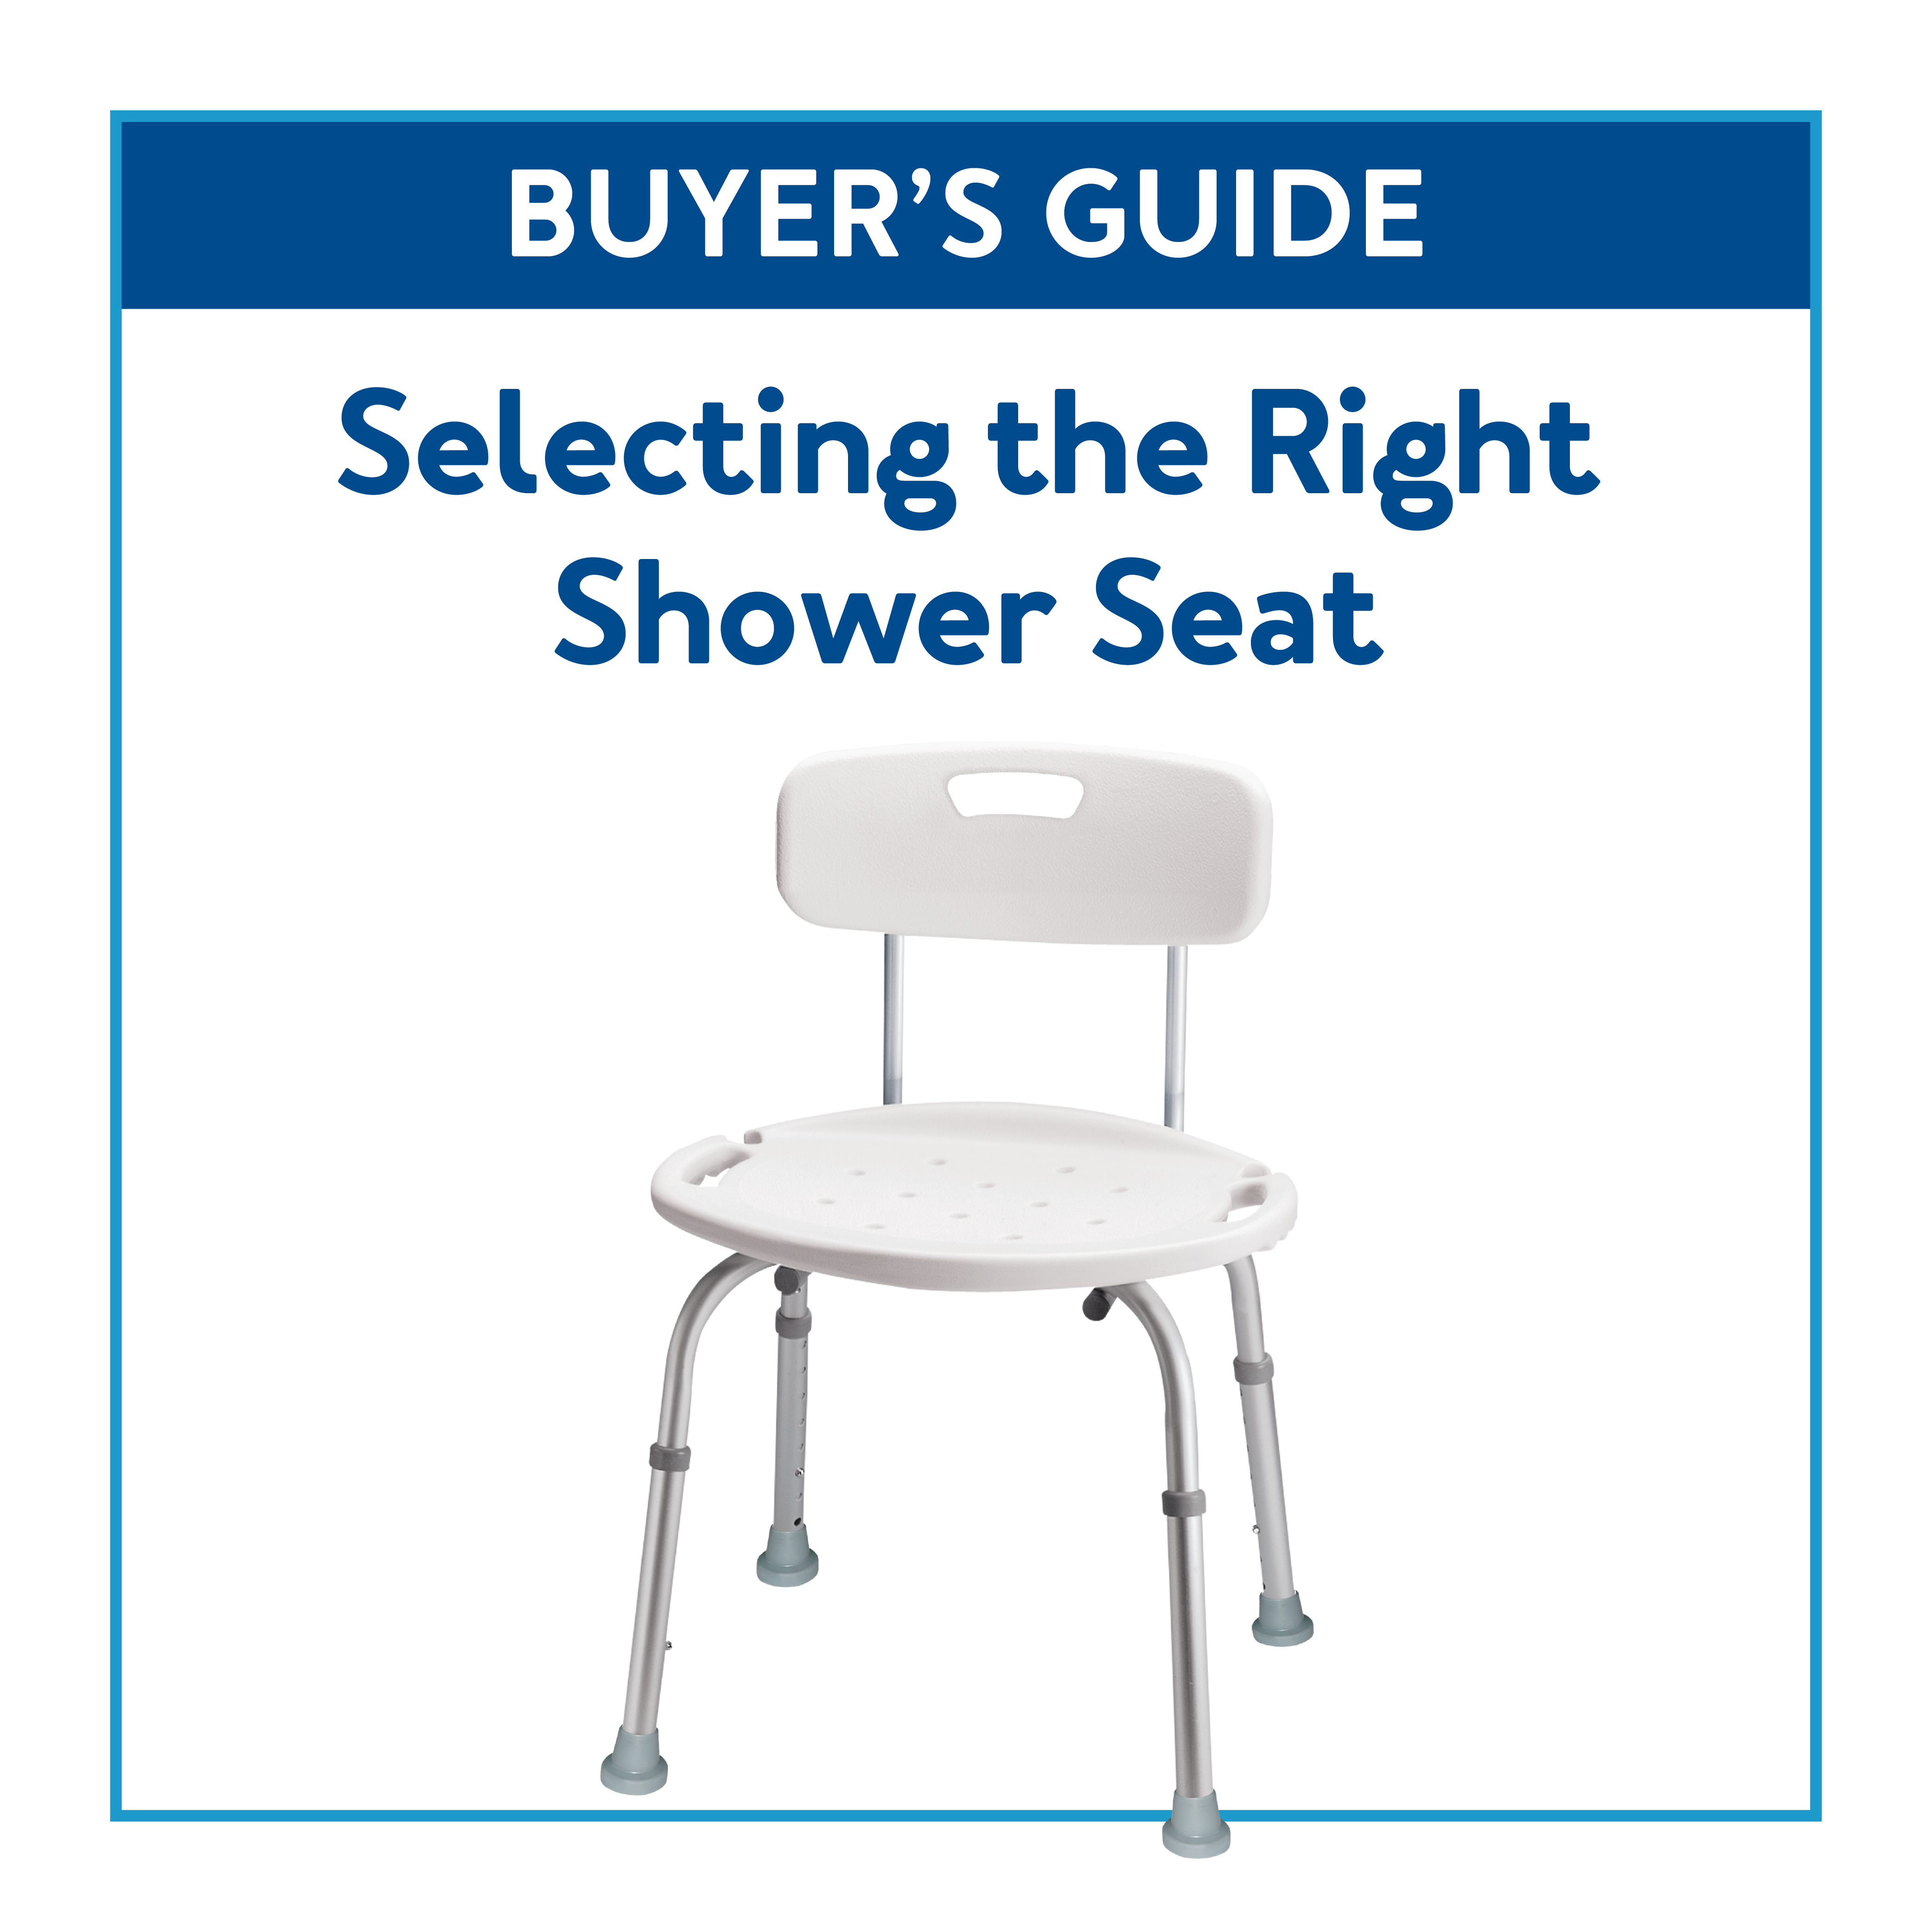 How to choose a shower enclosure, A buyer's guide to choosing a shower  enclosure, Shower Enclosure Buying Guide, Shower Tray Buying Guide, How  to choose a shower tray